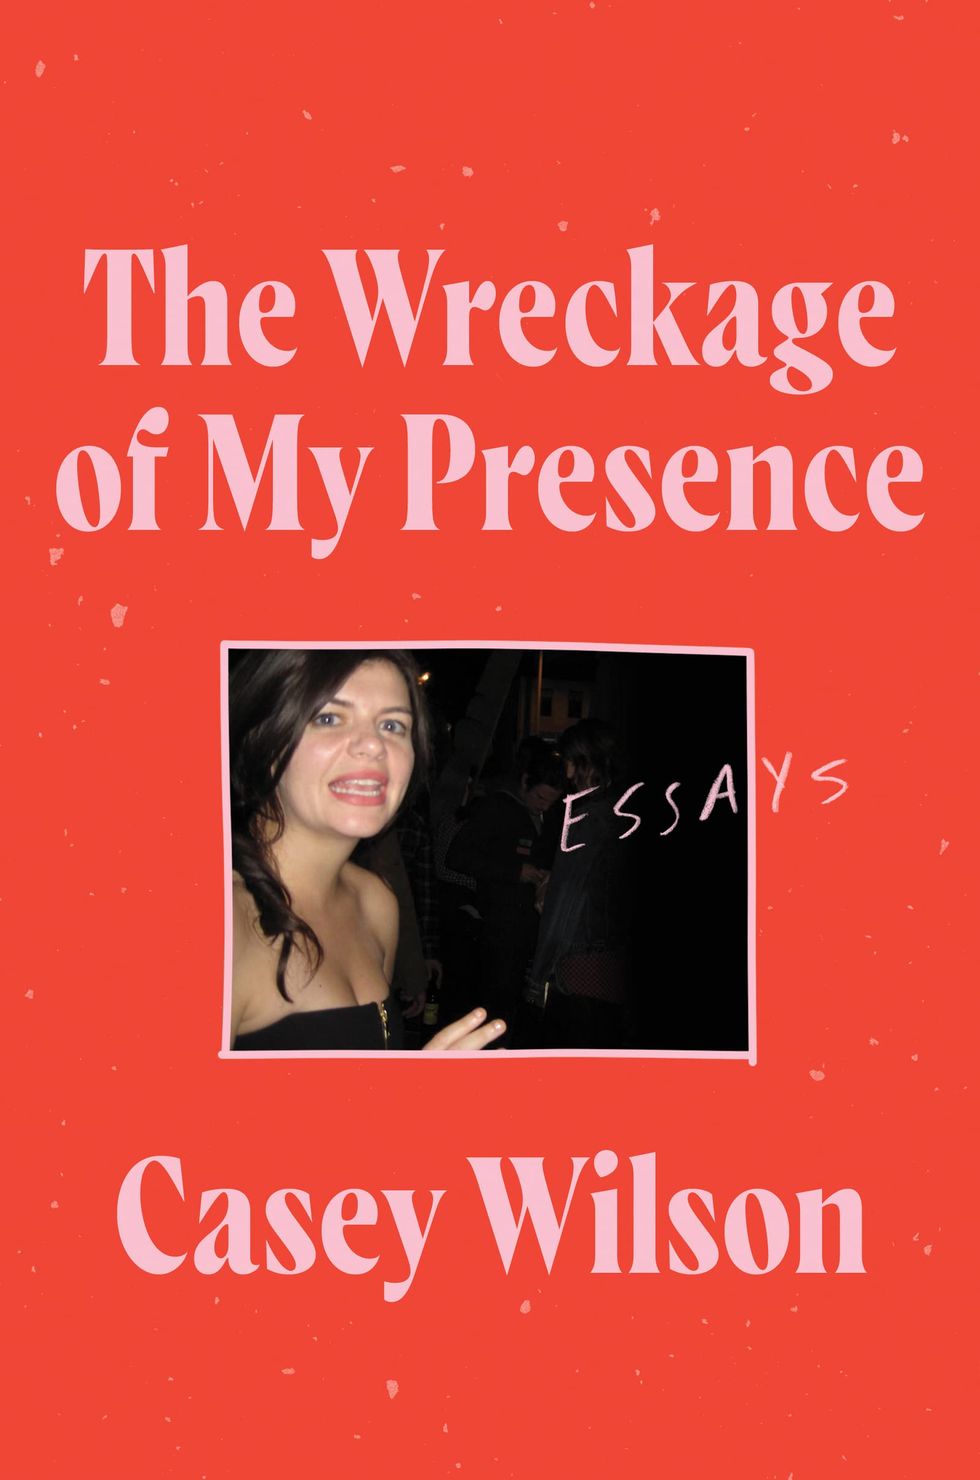 The Wreckage of My Presence by Casey Wilson (2021)